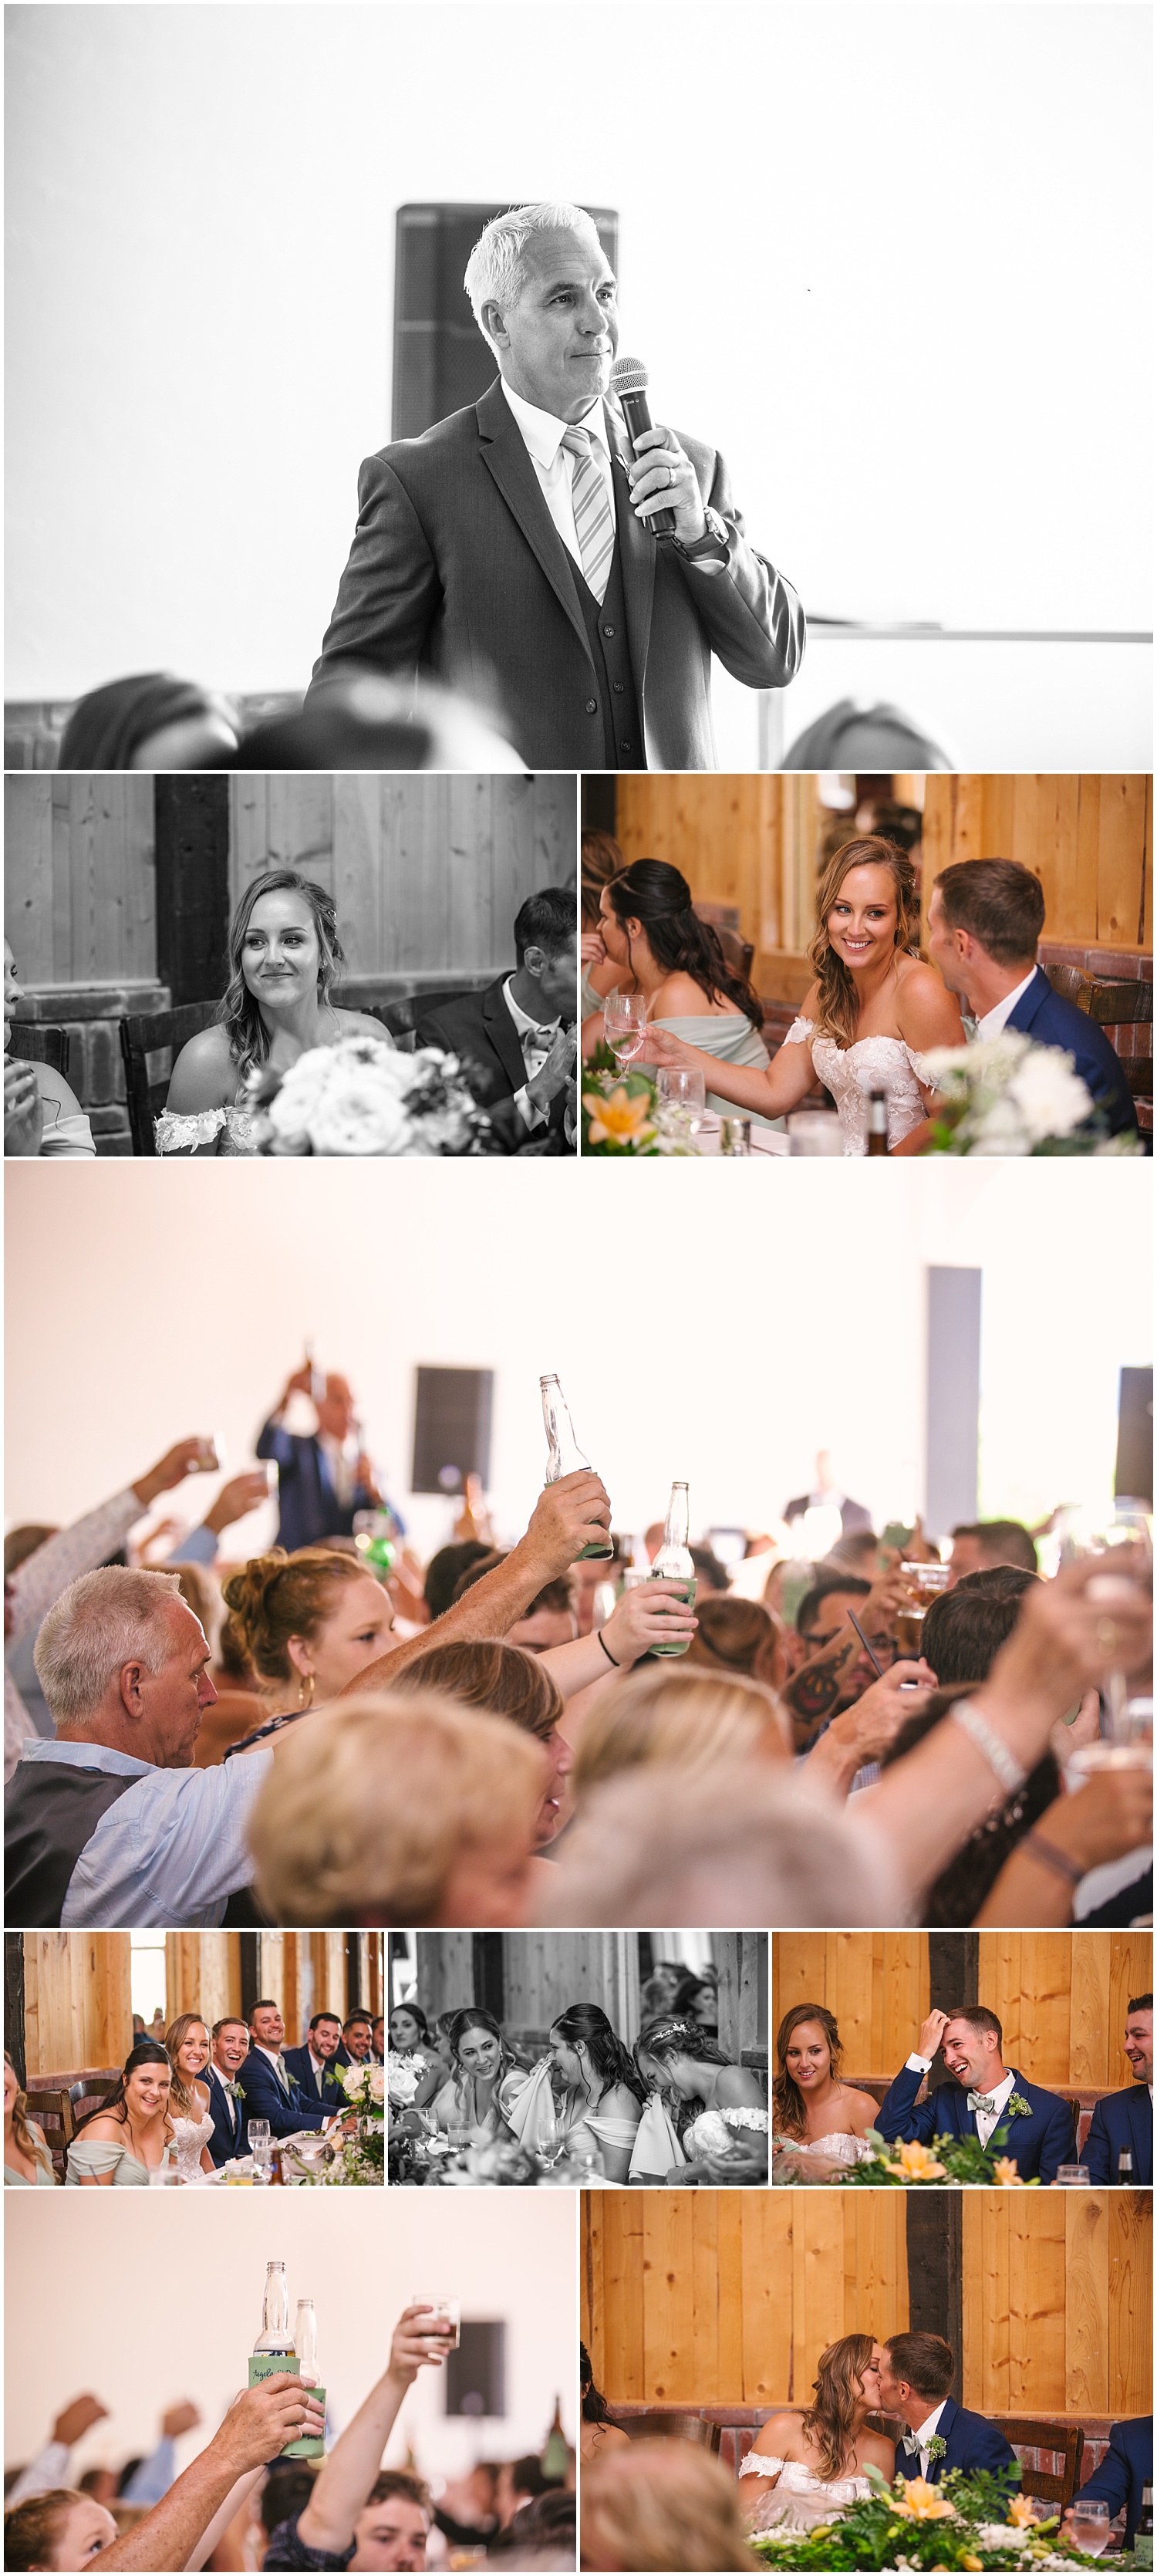 Toasts to the bride and groom at Crooked Willow Farms wedding reception hall